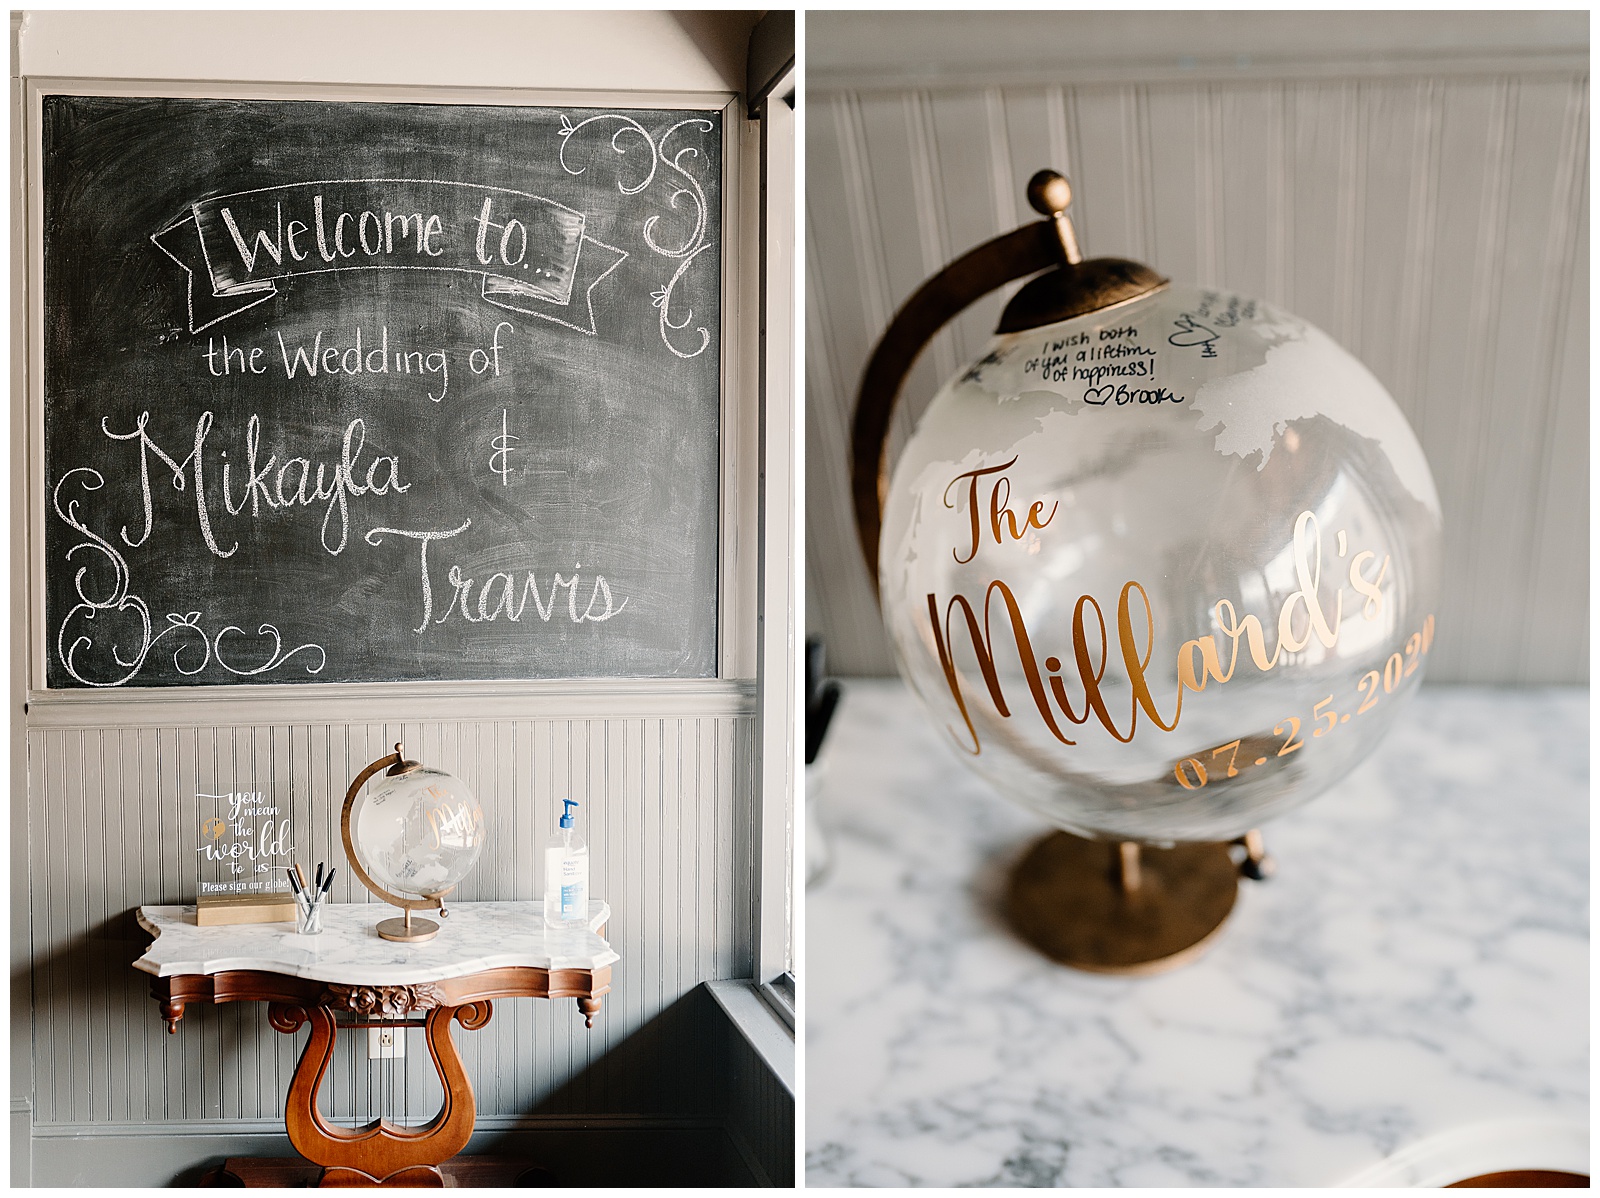 Welcome to the wedding of Mikayla & Travis at their modern summer wedding with glass globe guestbook